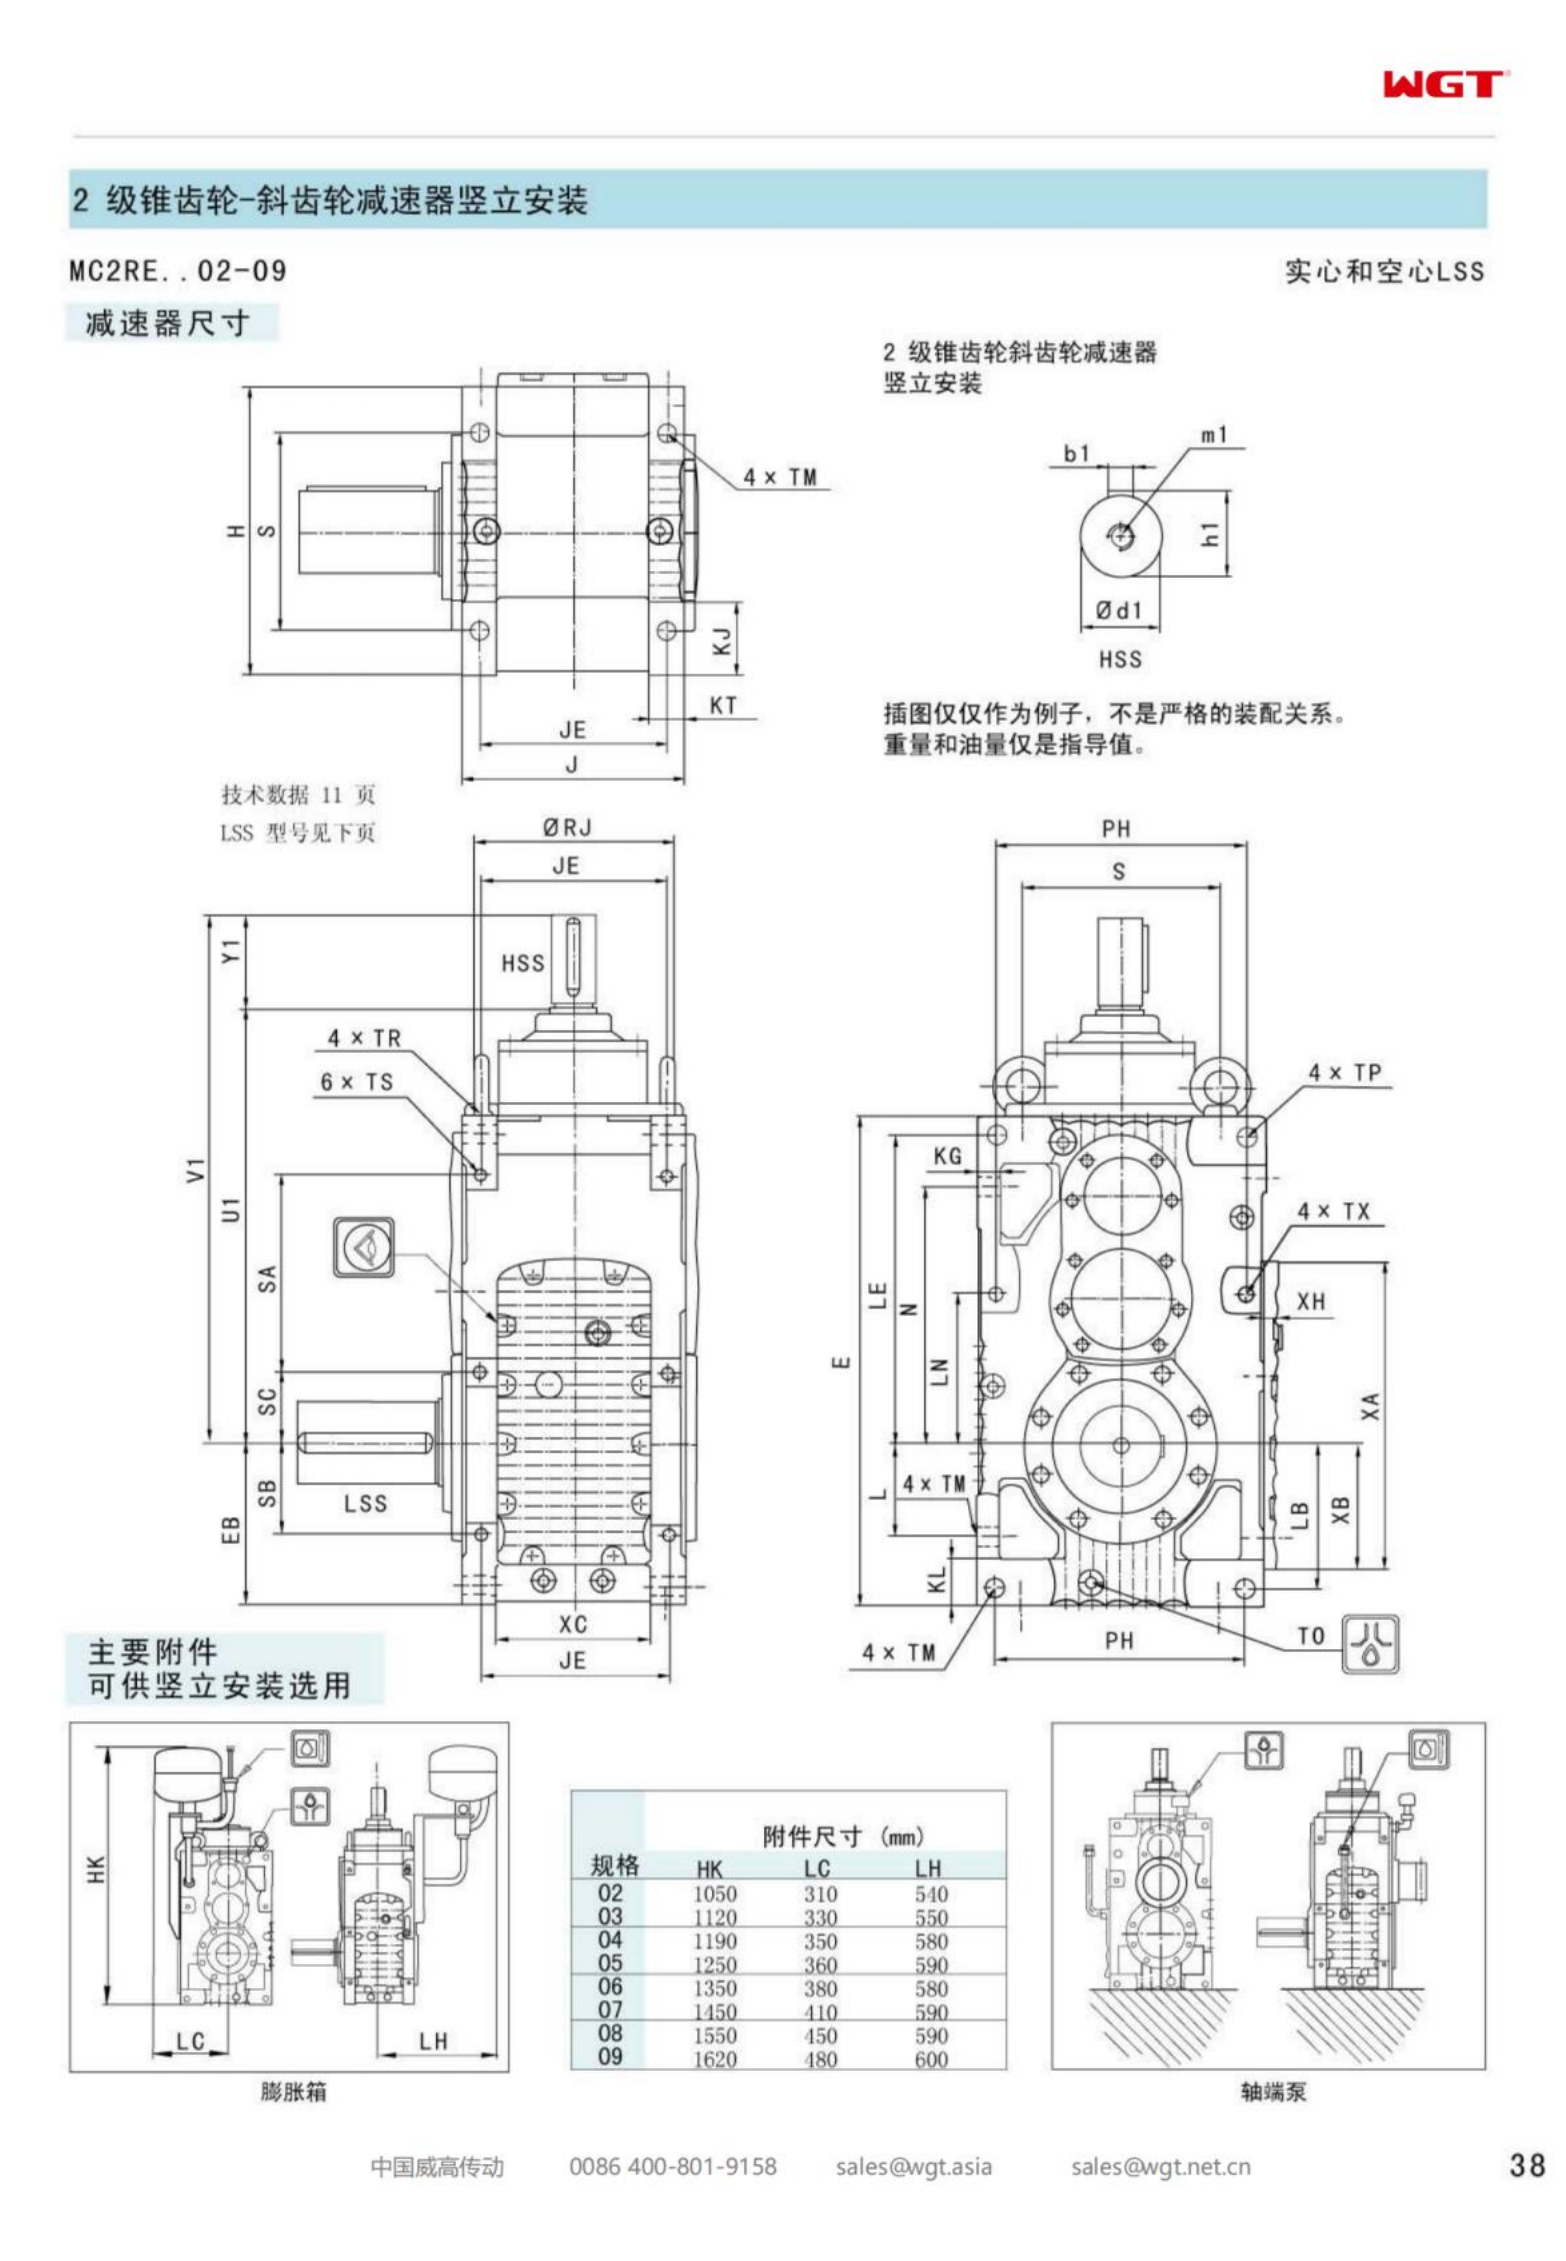 MC2RESF06 replaces _SEW_MC_Series gearbox (patent)